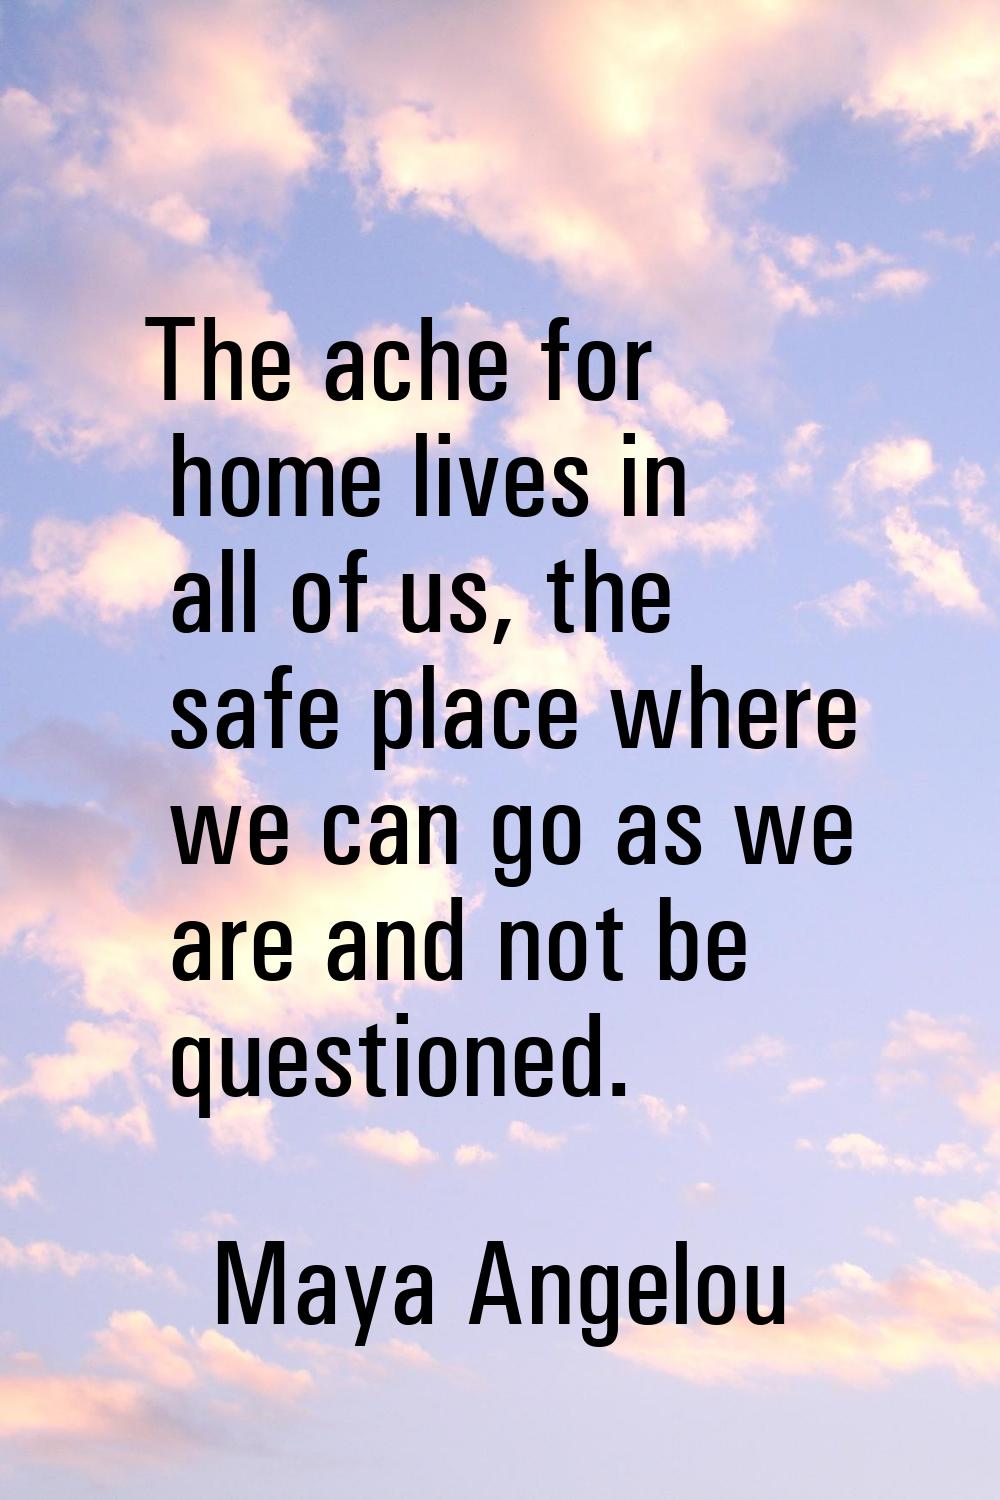 The ache for home lives in all of us, the safe place where we can go as we are and not be questione